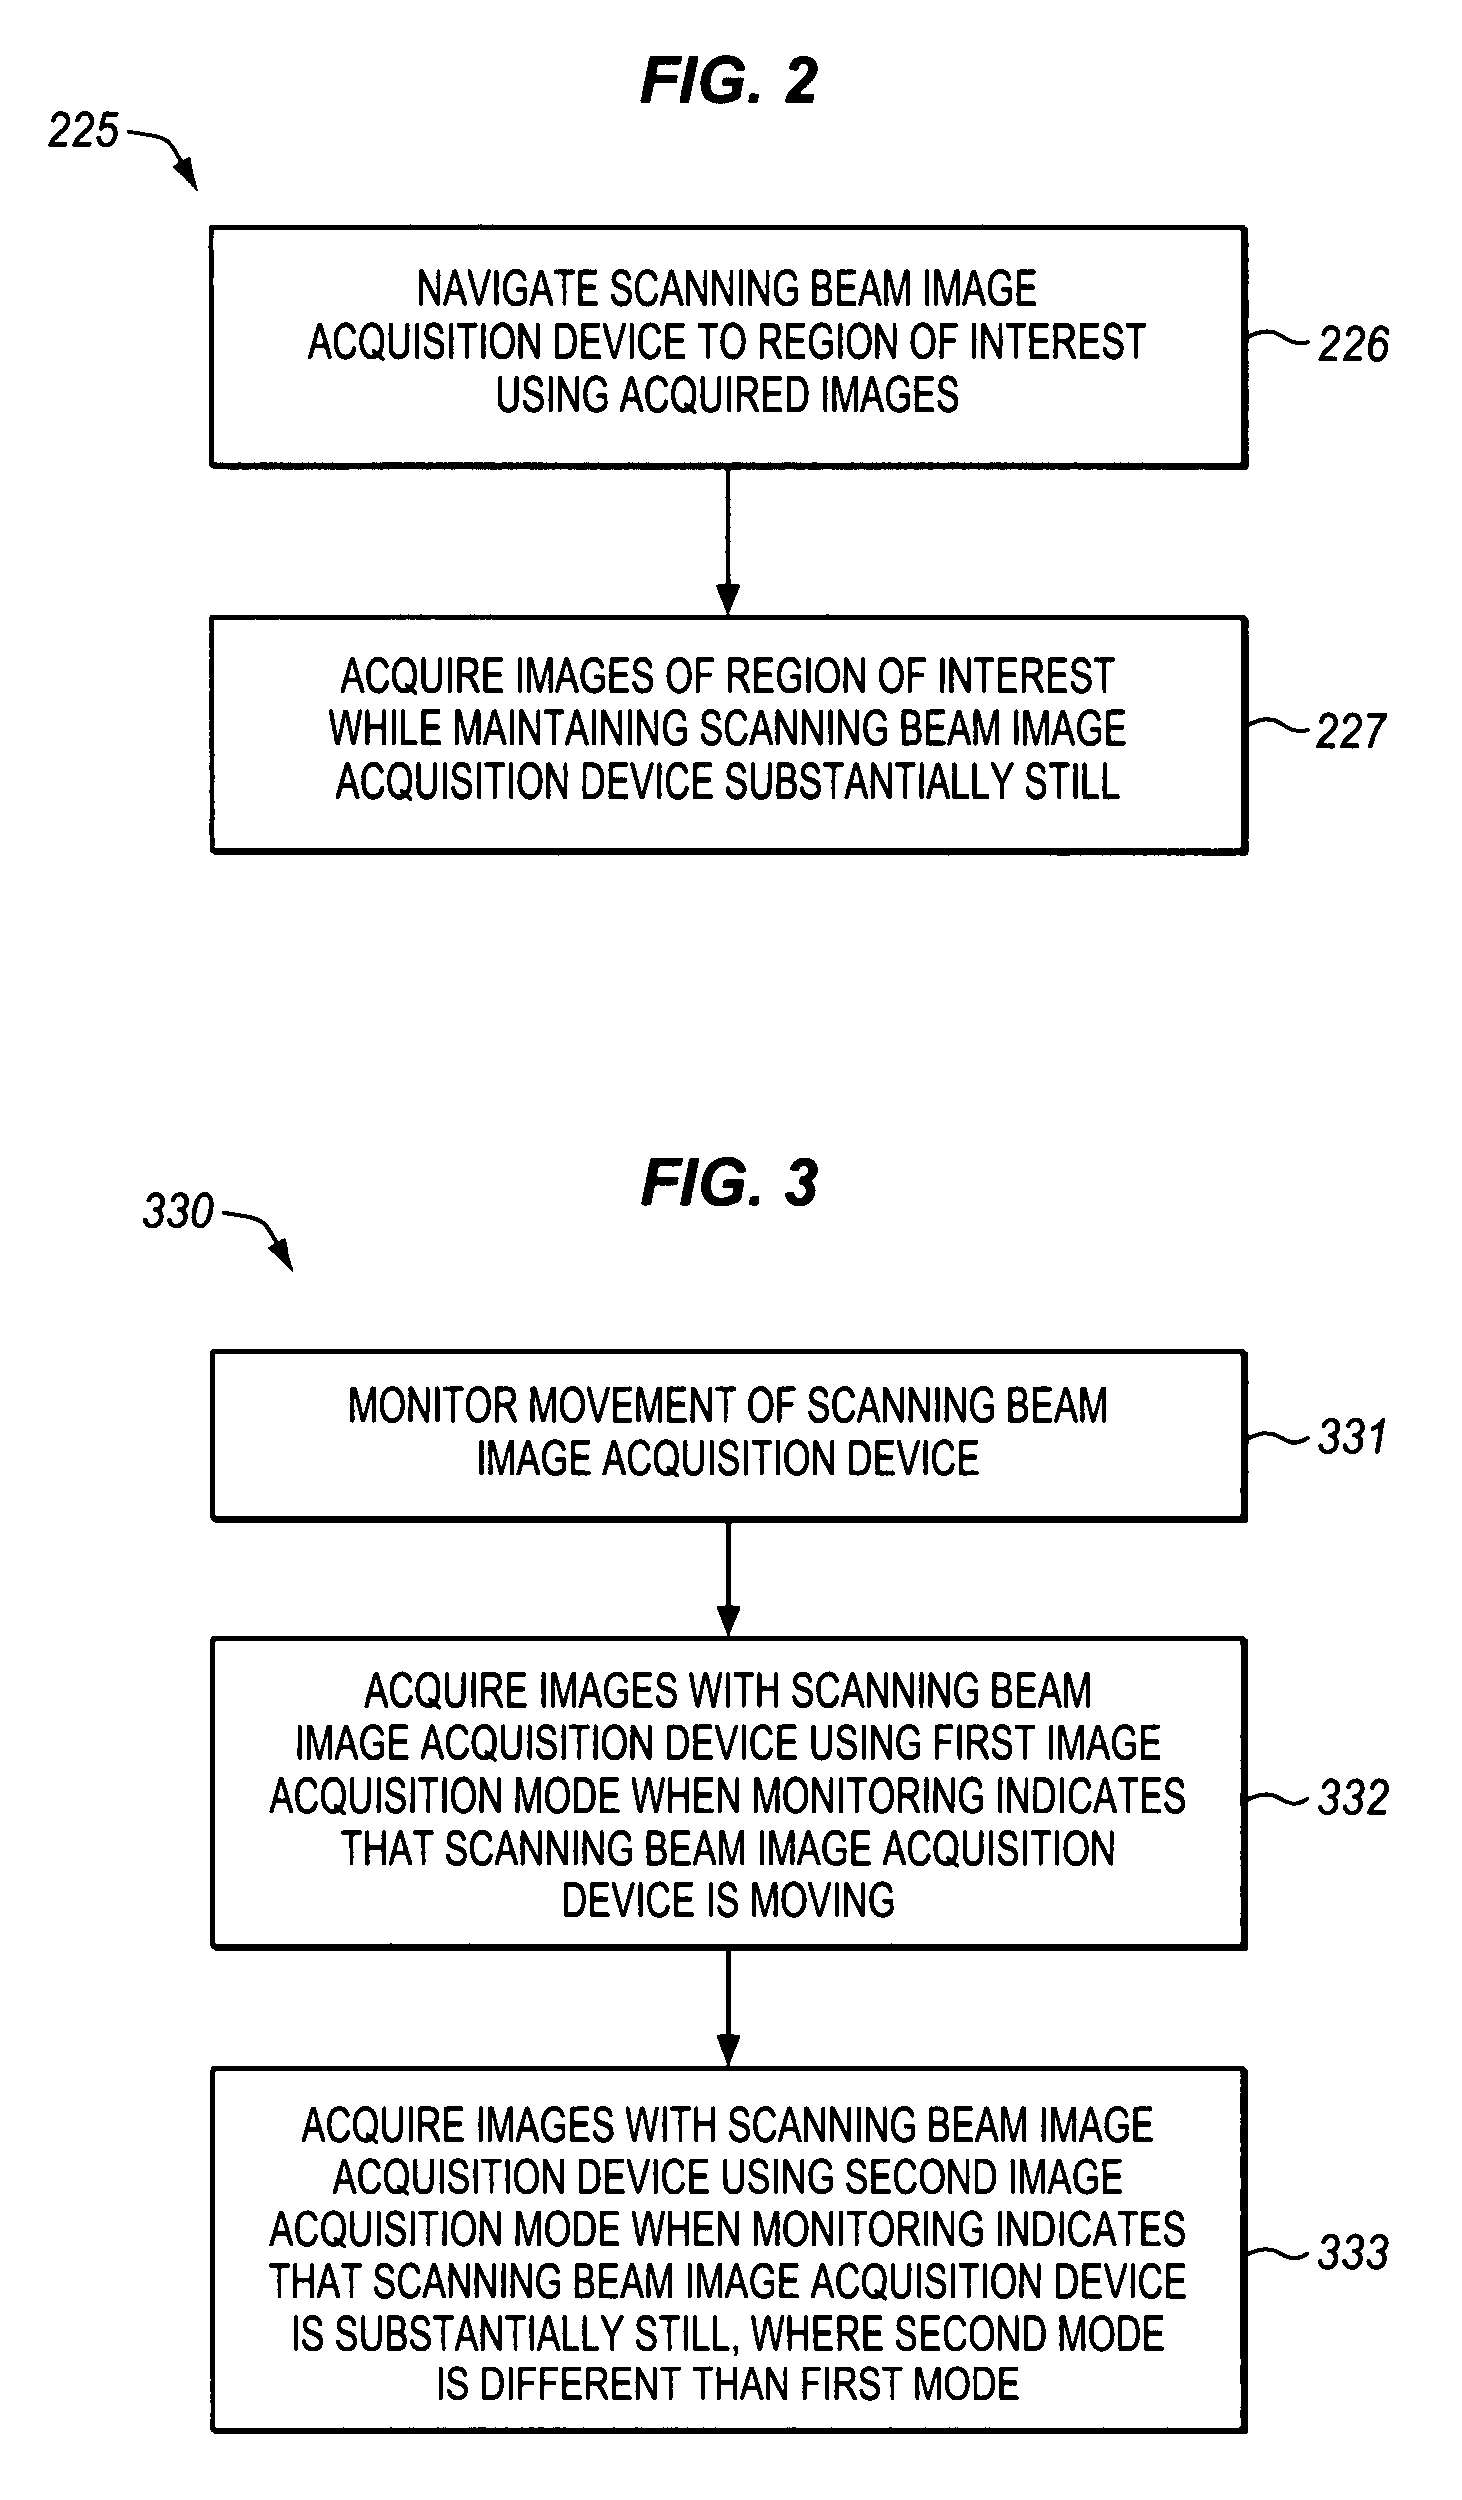 Scanning beam device having different image acquisition modes